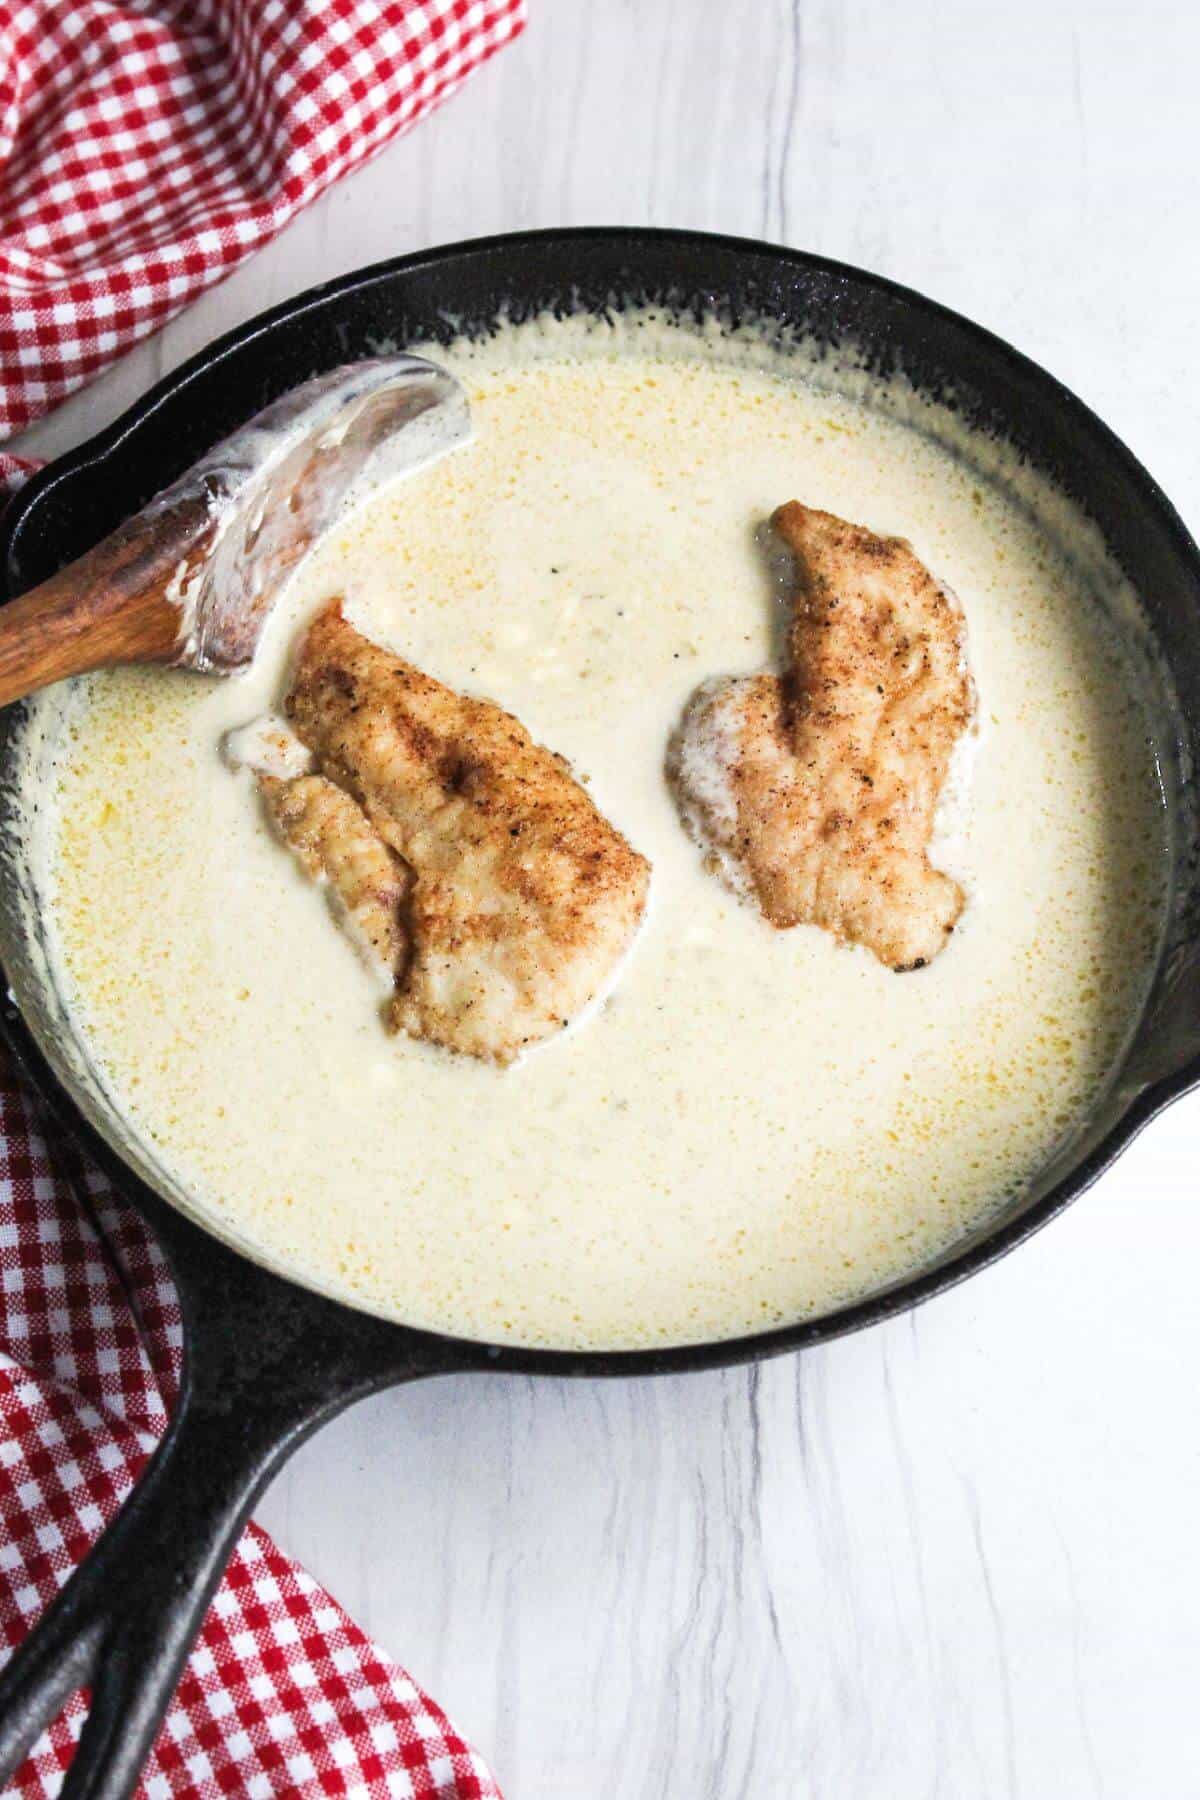 A skillet full of chicken in a creamy sauce with a wooden spoon.